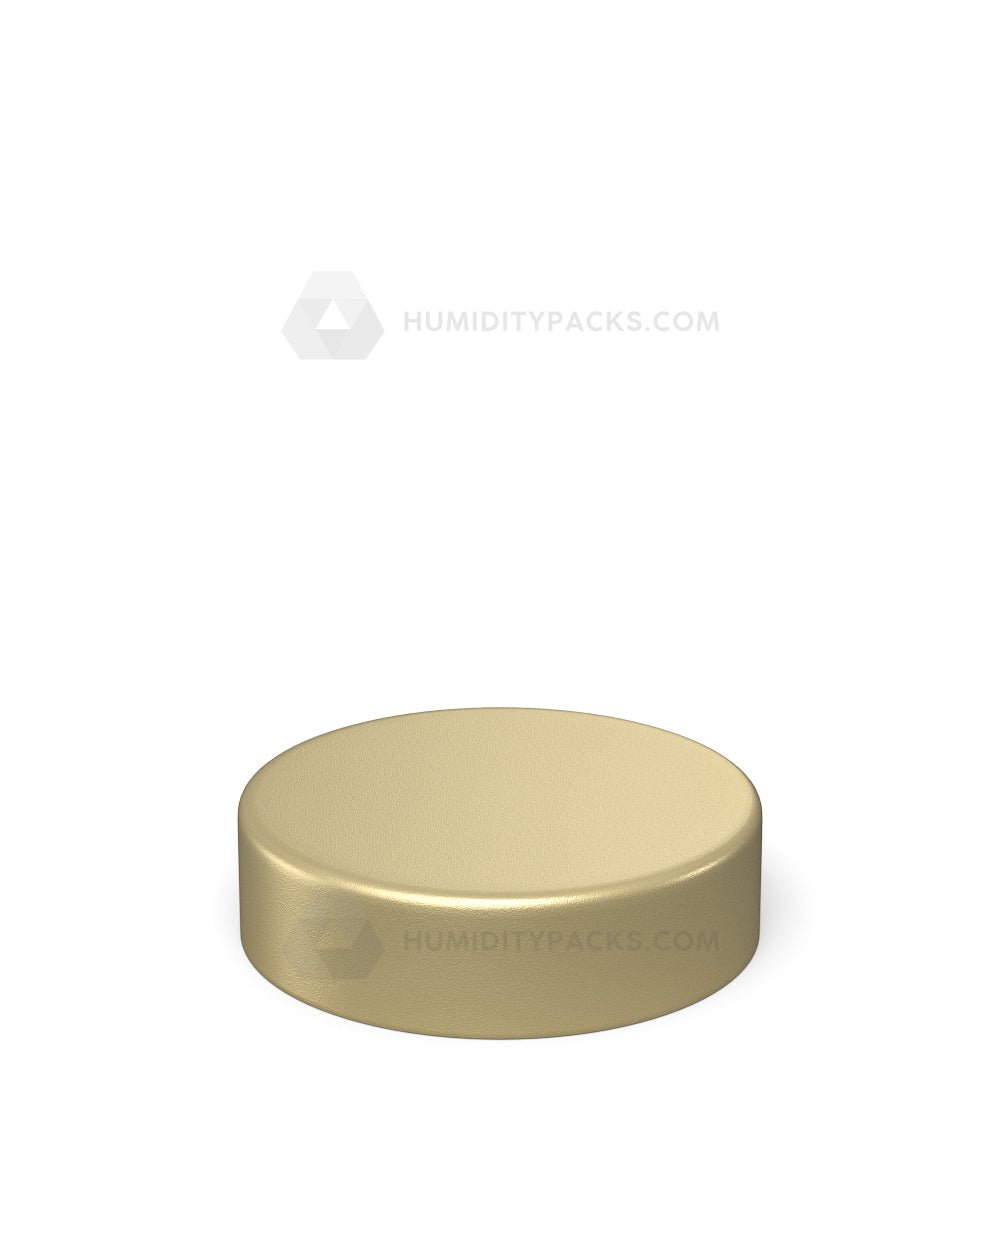 50mm Push and Turn Smooth Child Resistant Plastic Caps With Foam Liner - Matte Gold - 100/Box Humidity Packs - 3